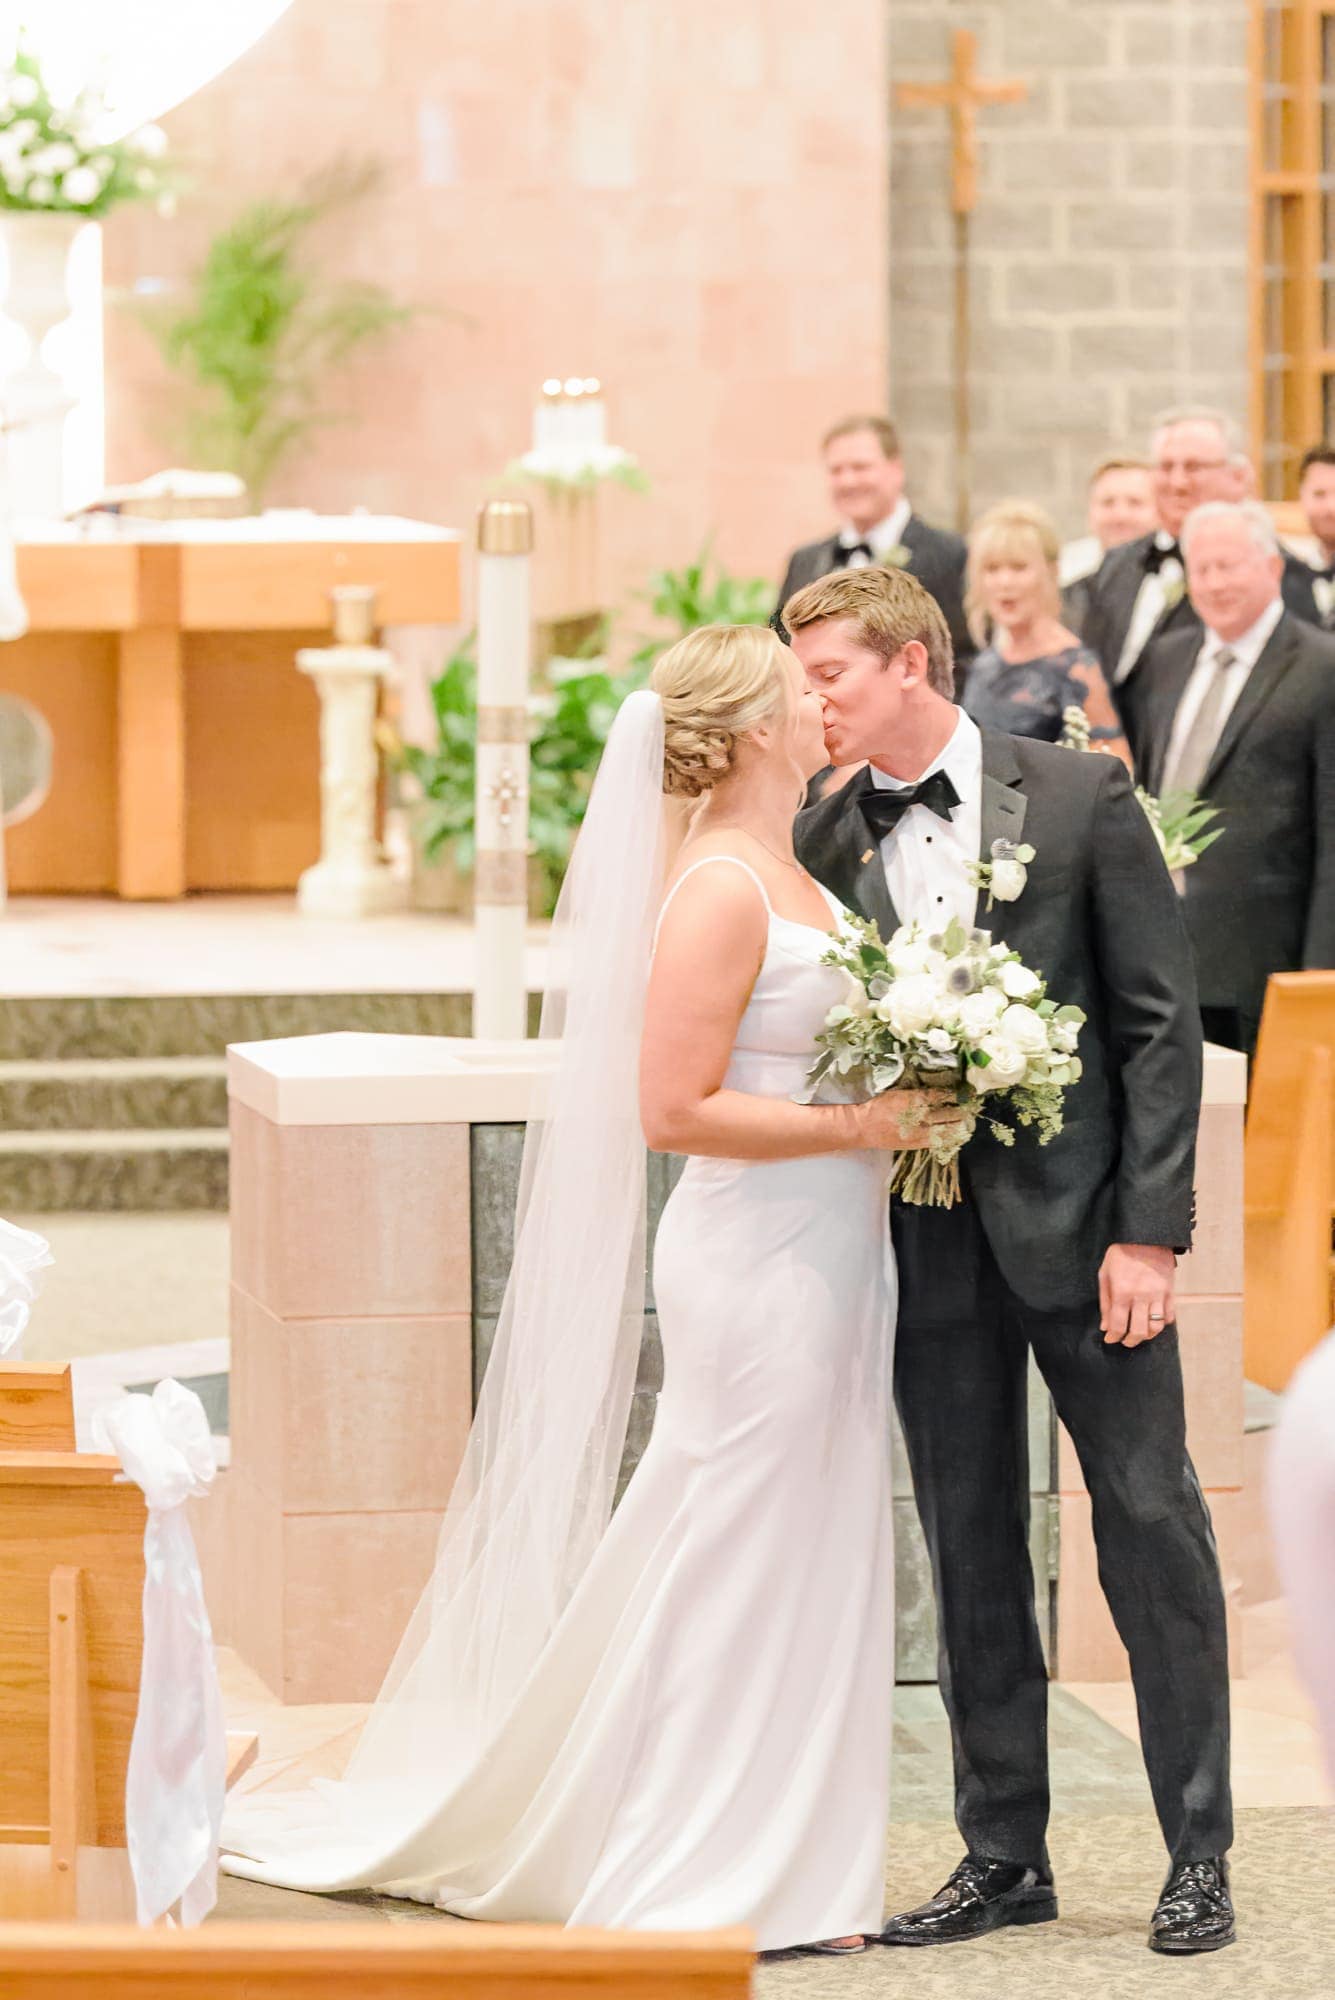 The bride and groom share one last kiss as they walk out of the church on the way to their Charlotte reception at the Longview Country Club.